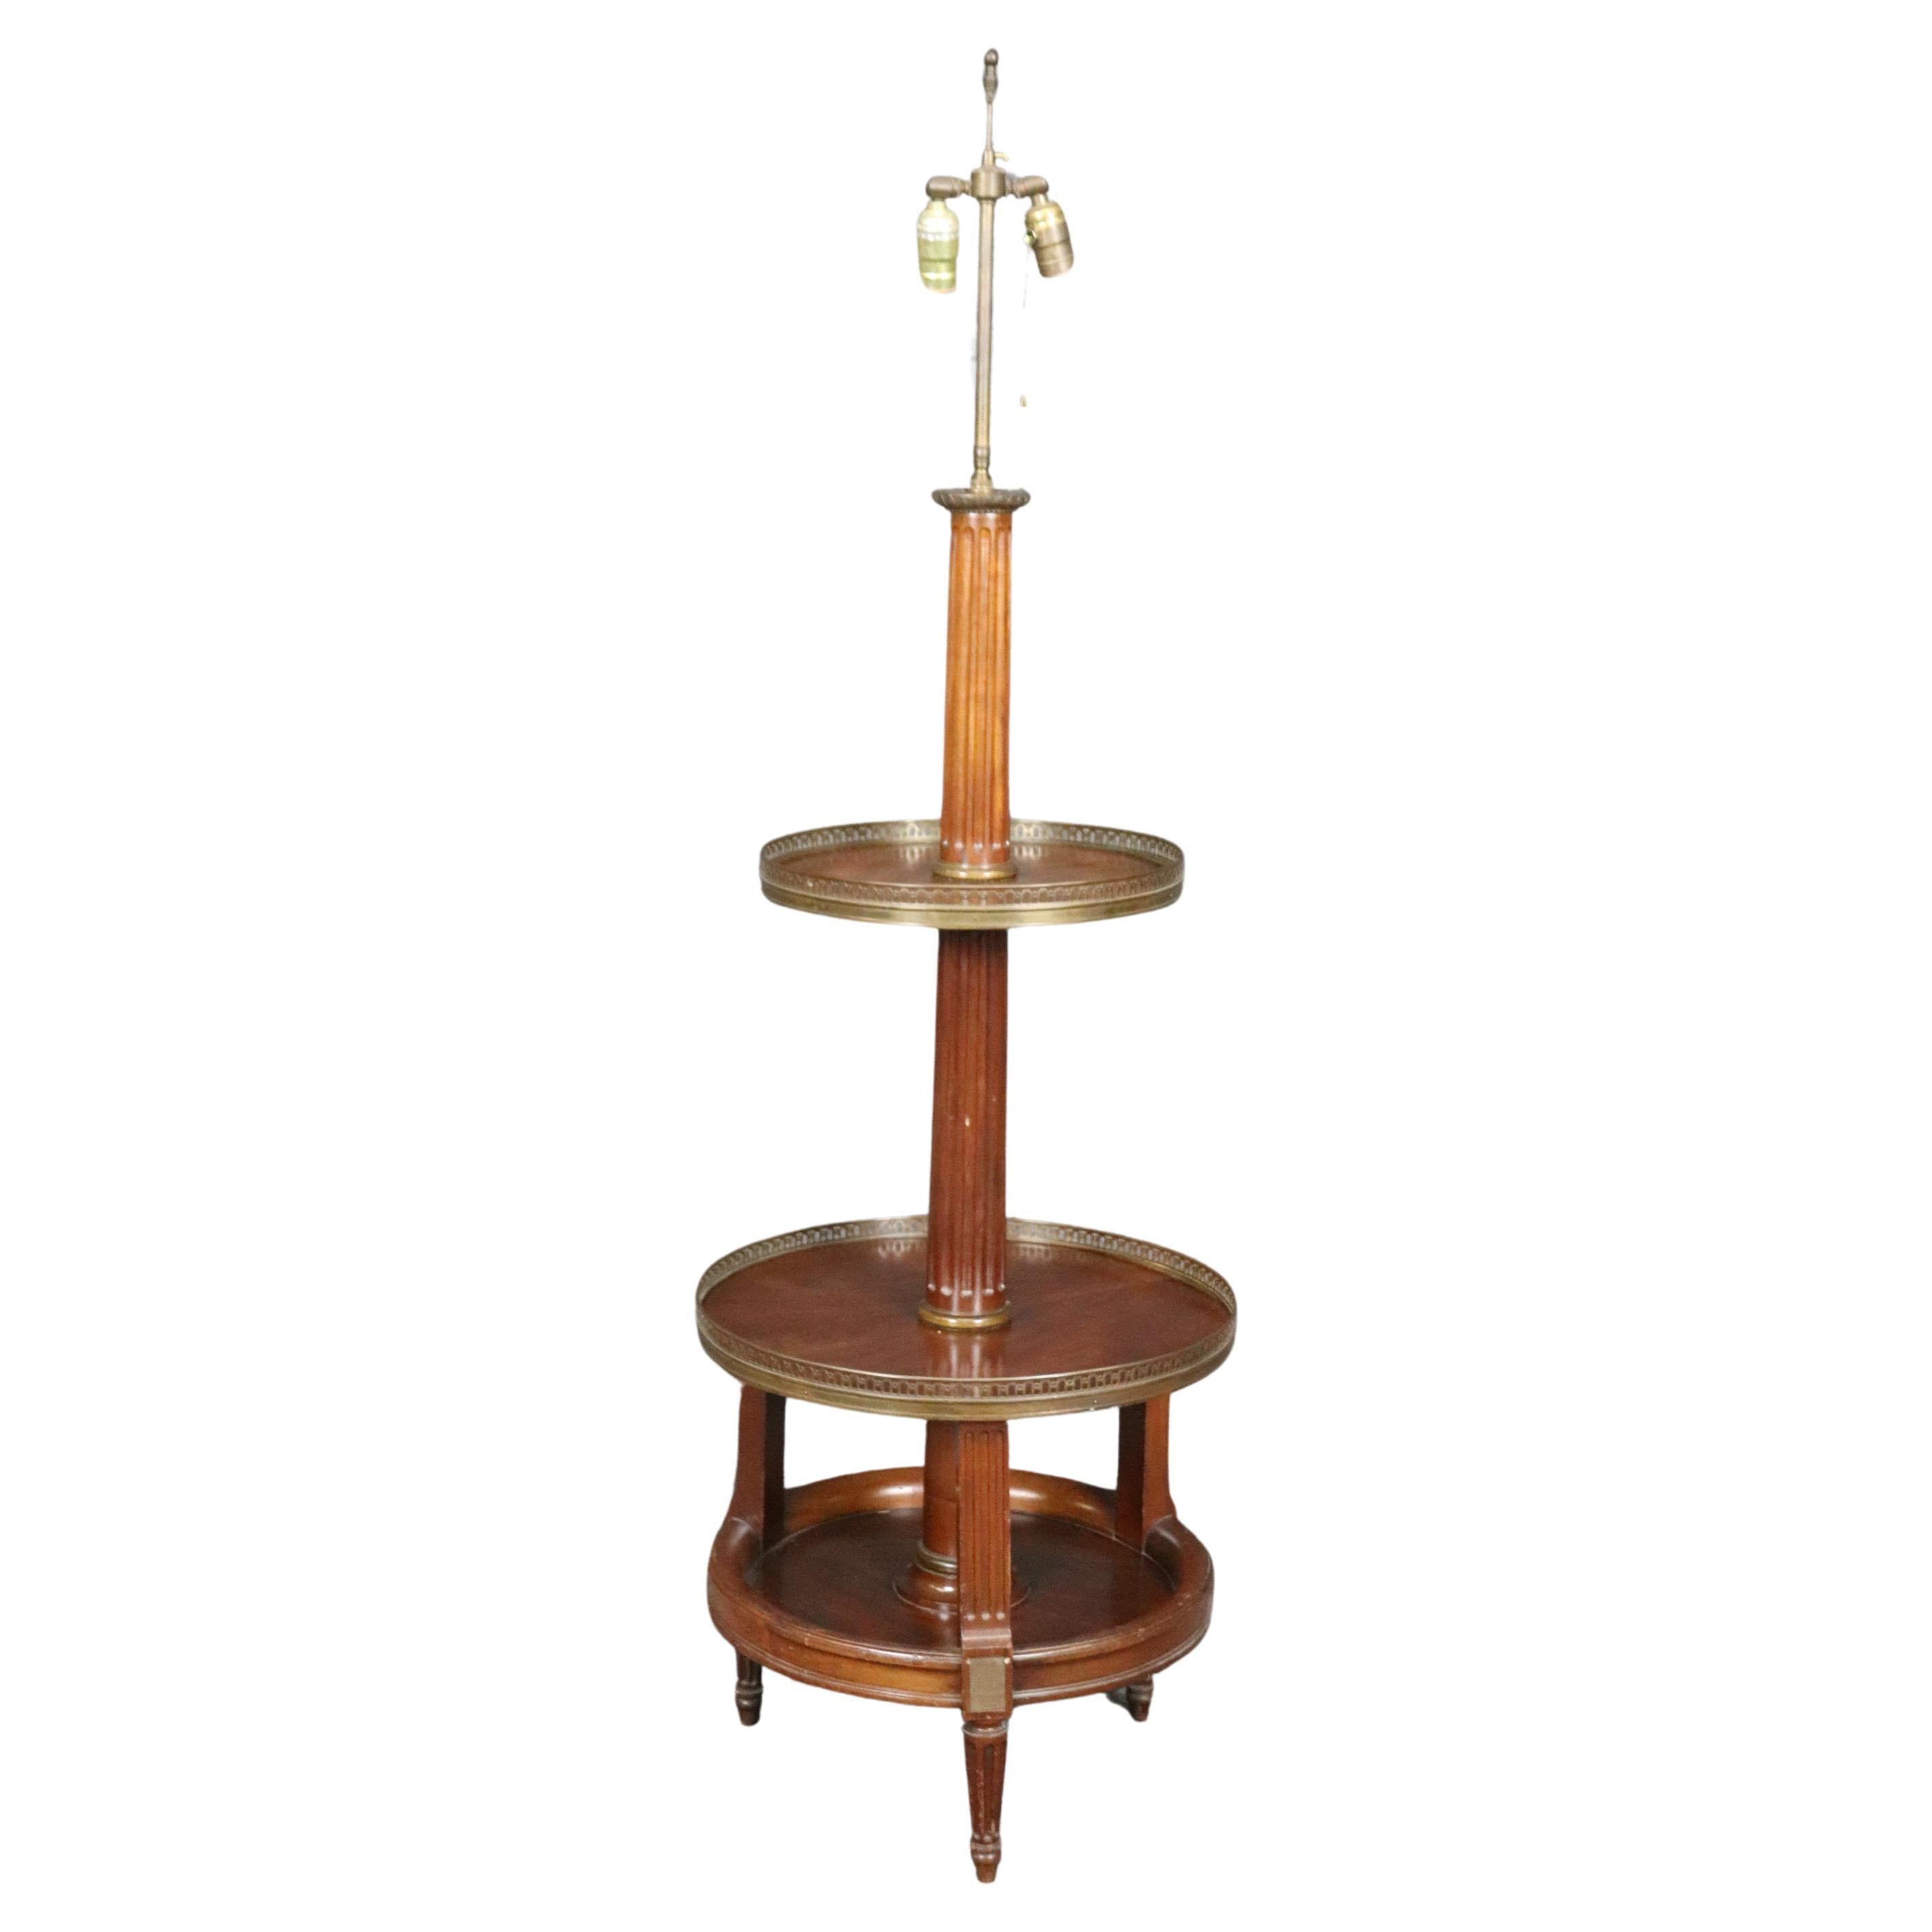 French Directoire Mahogany and Brass Mounted Floor Lamp with Shelves